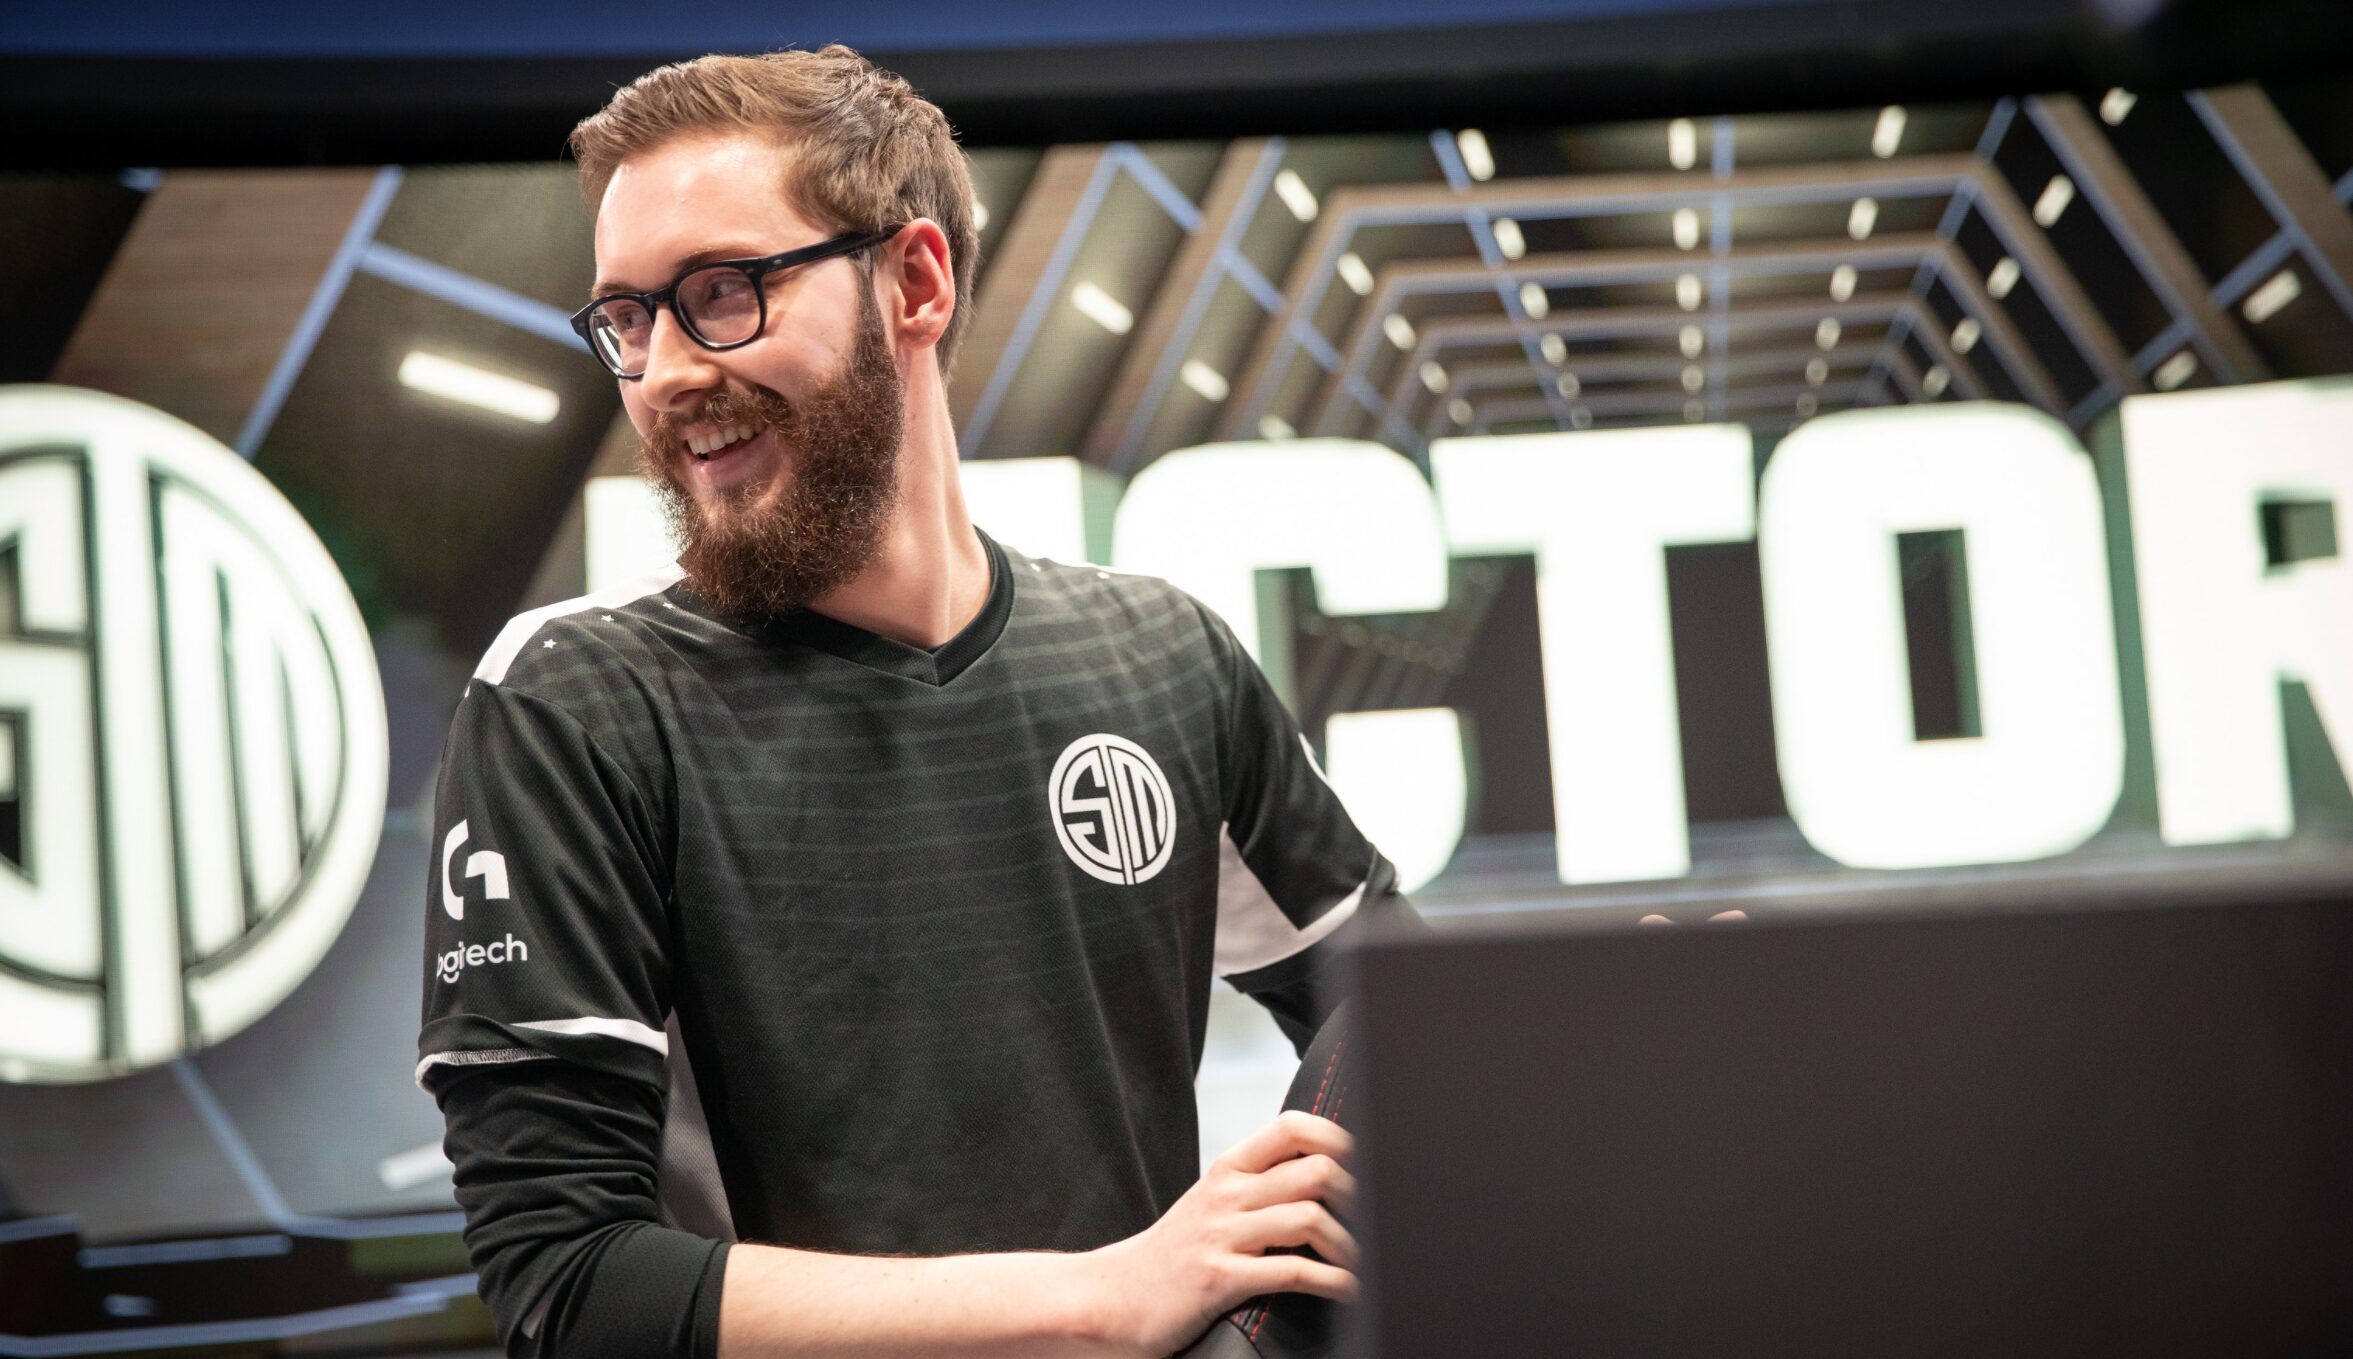 Bjergsen comes back from retirement